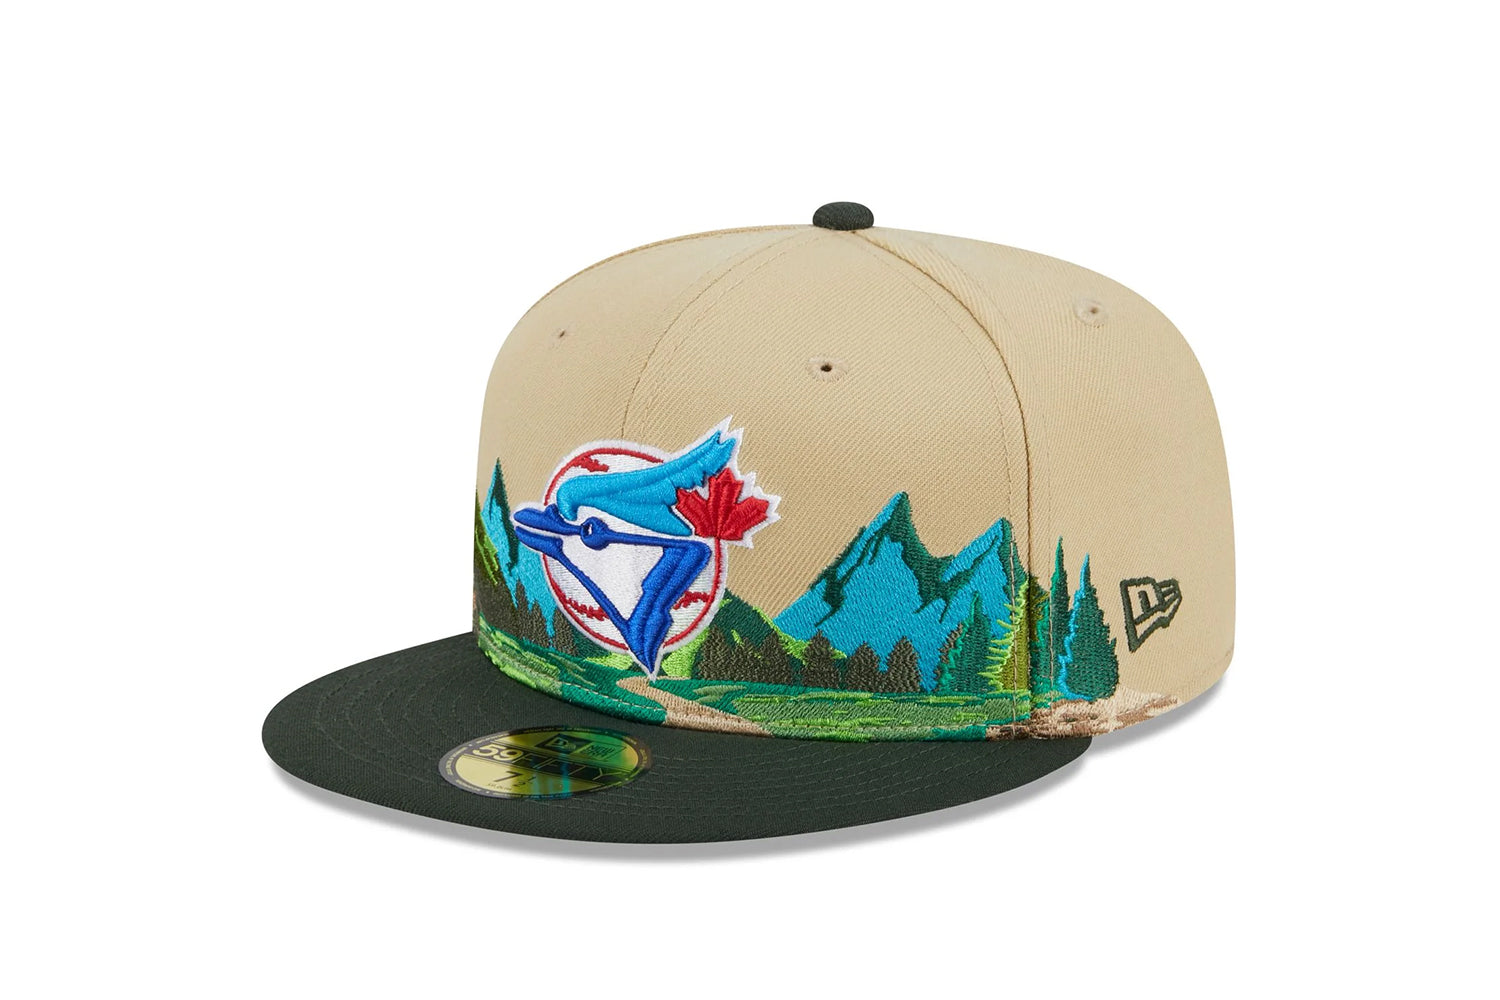 TORONTO BLUE JAYS TEAM LANDSCAPE 59FIFTY FITTED CAP – NRML